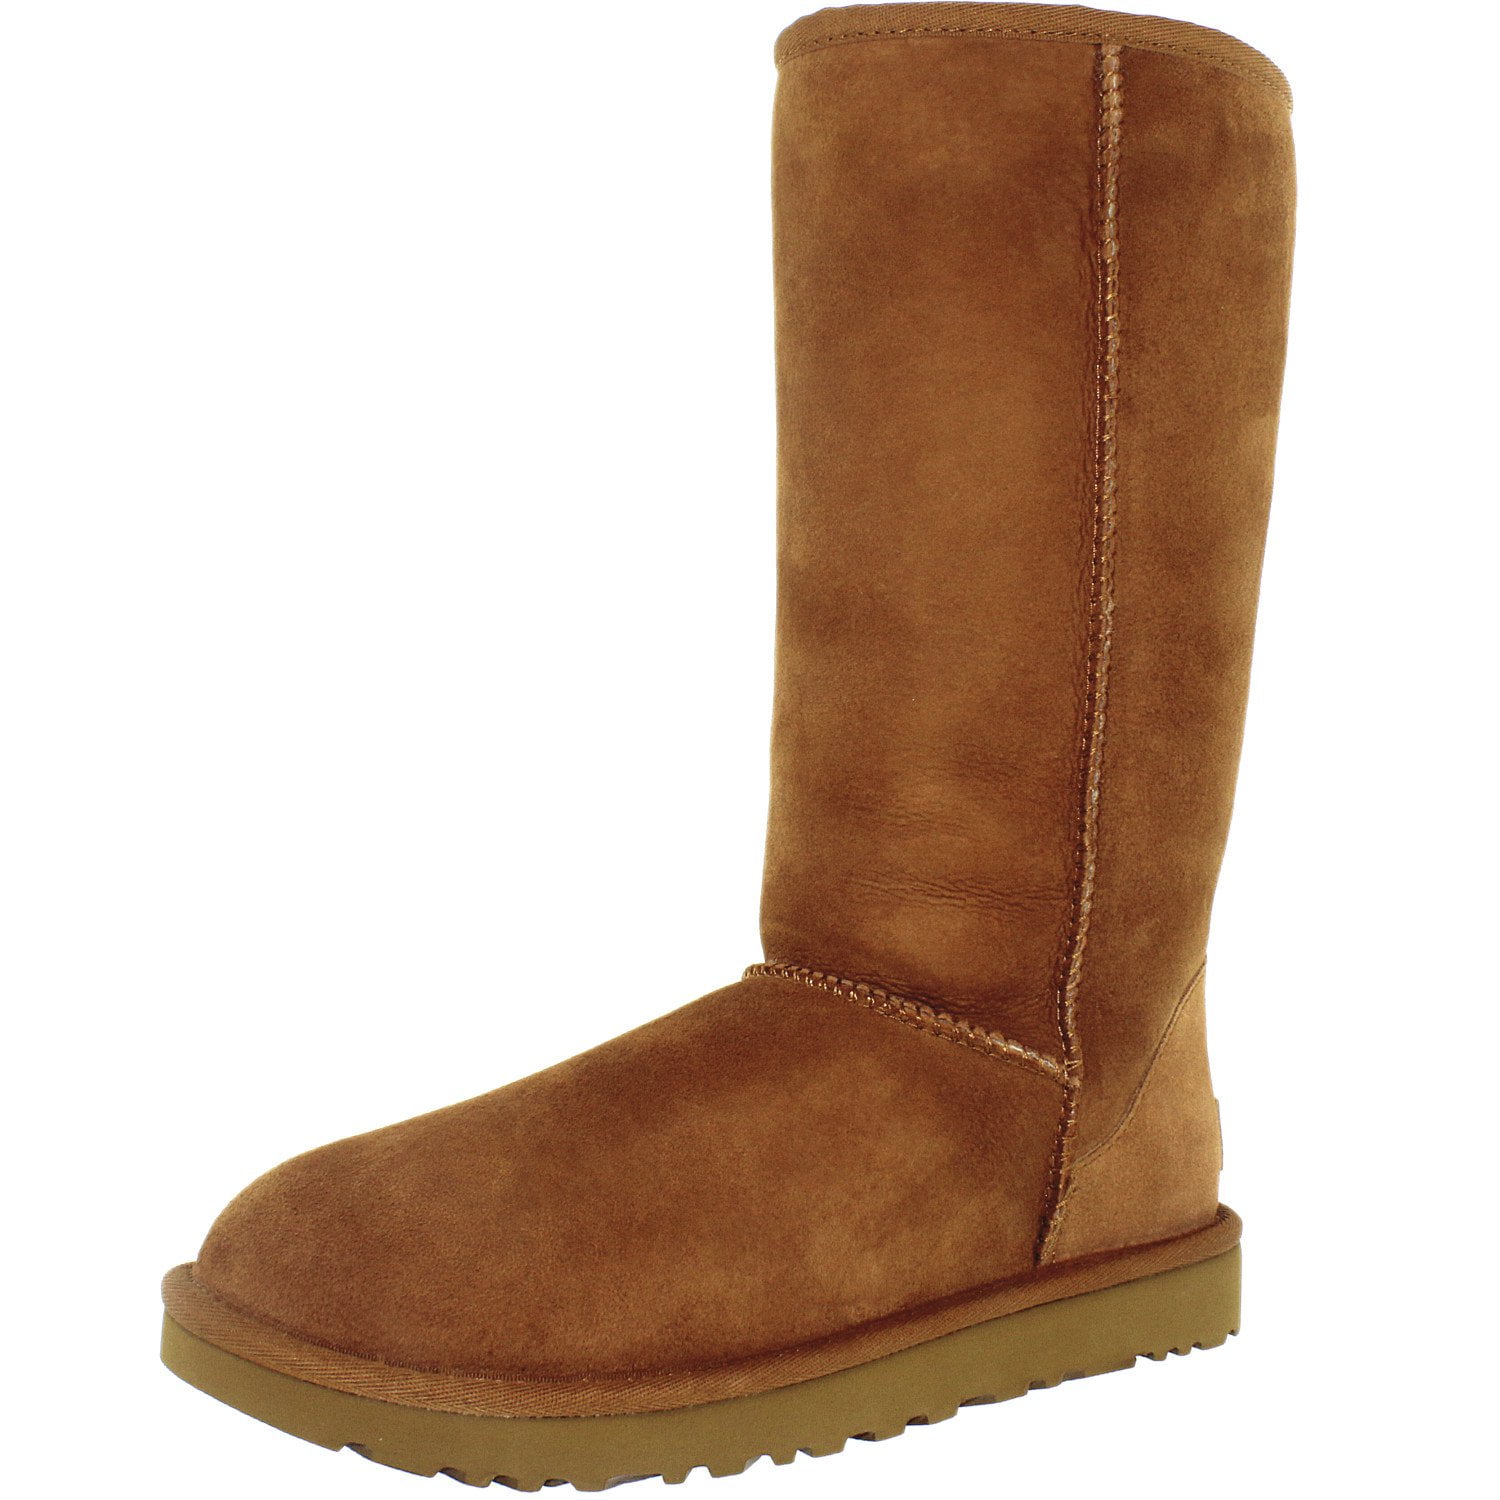 tall uggs with fur